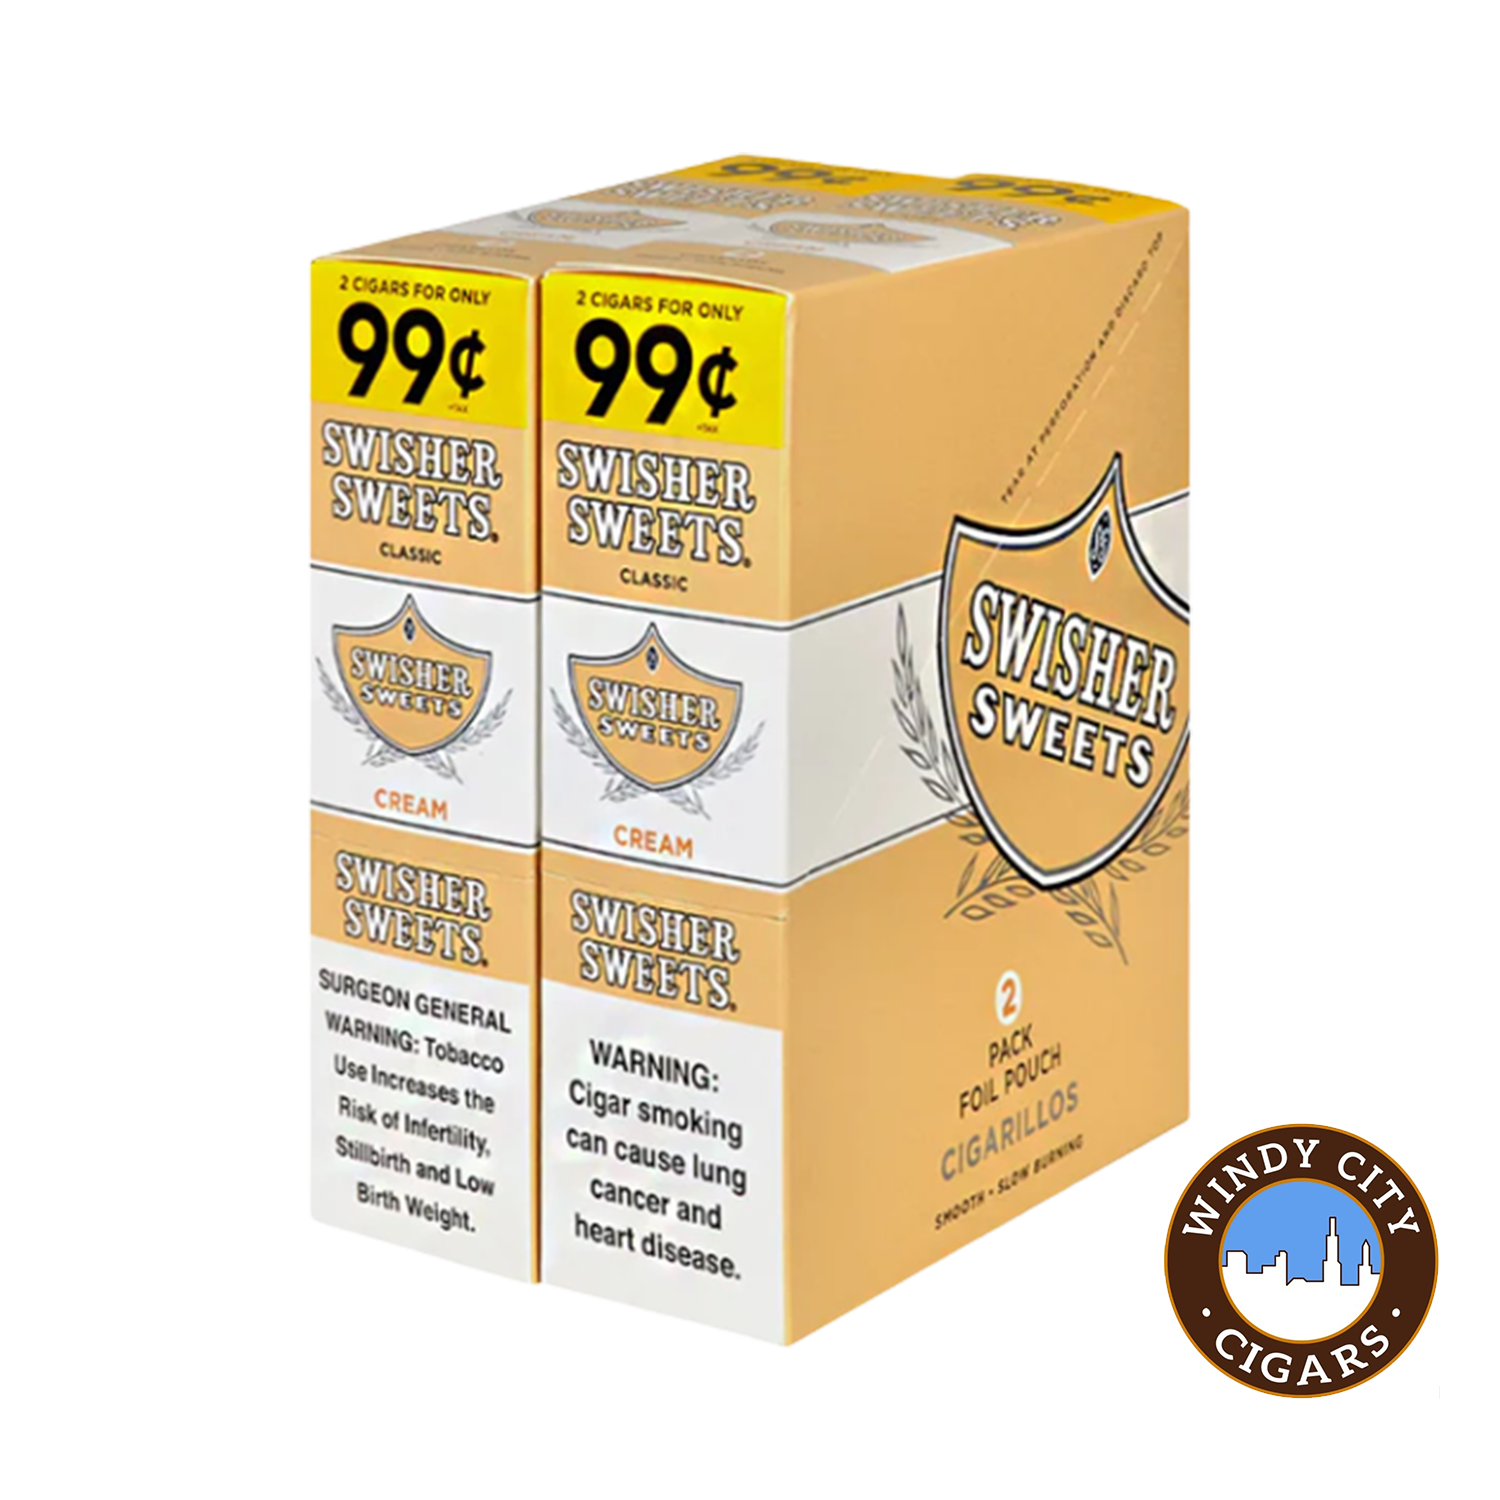 Swisher Sweets Cigarillos 2 for 99c - Cream1